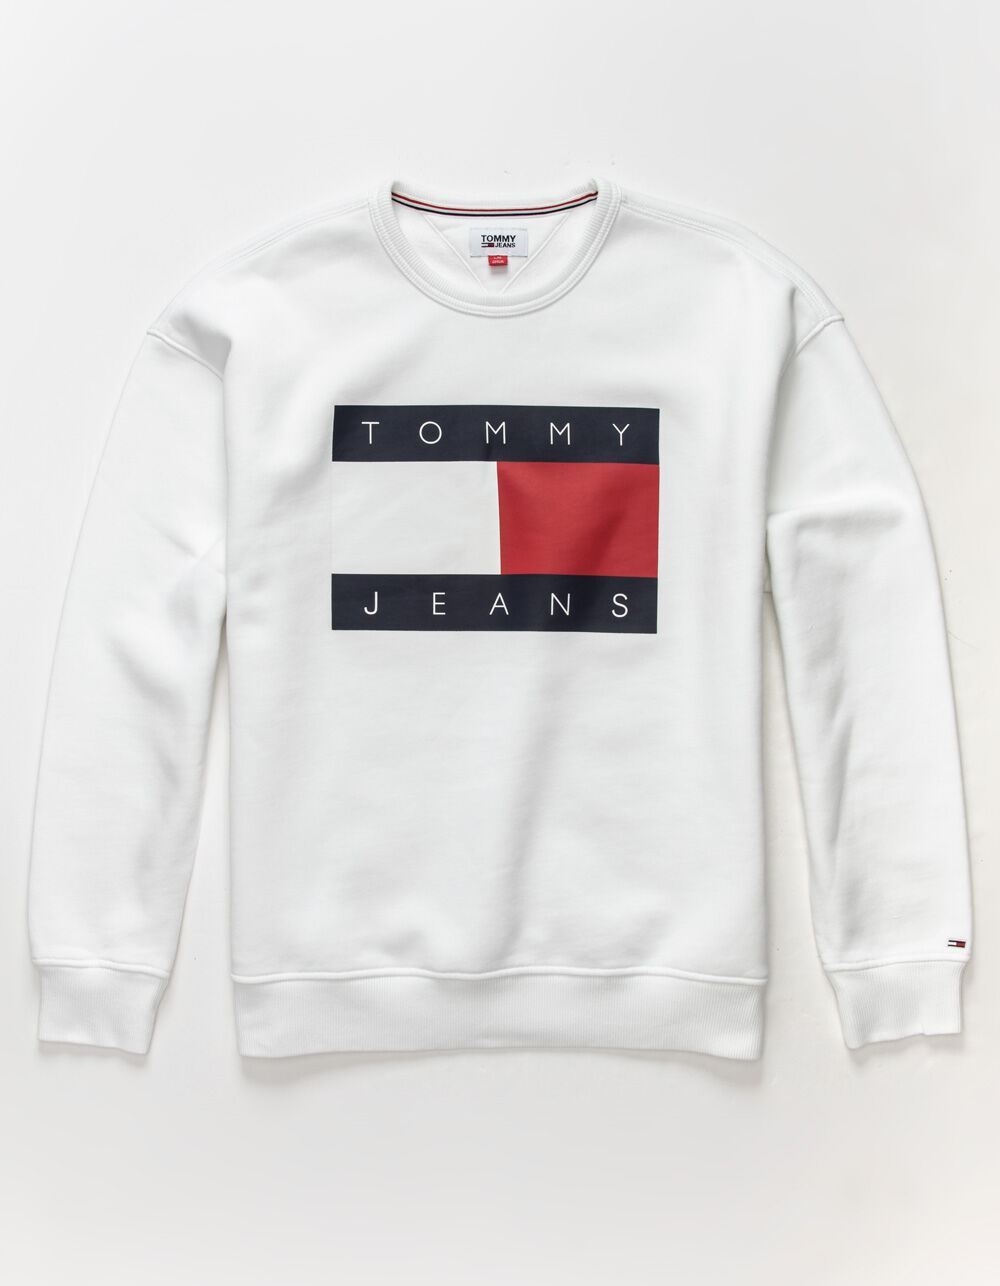 TOMMY JEANS Mens Lucca Crew Neck Sweatshirt - WHITE | Tillys